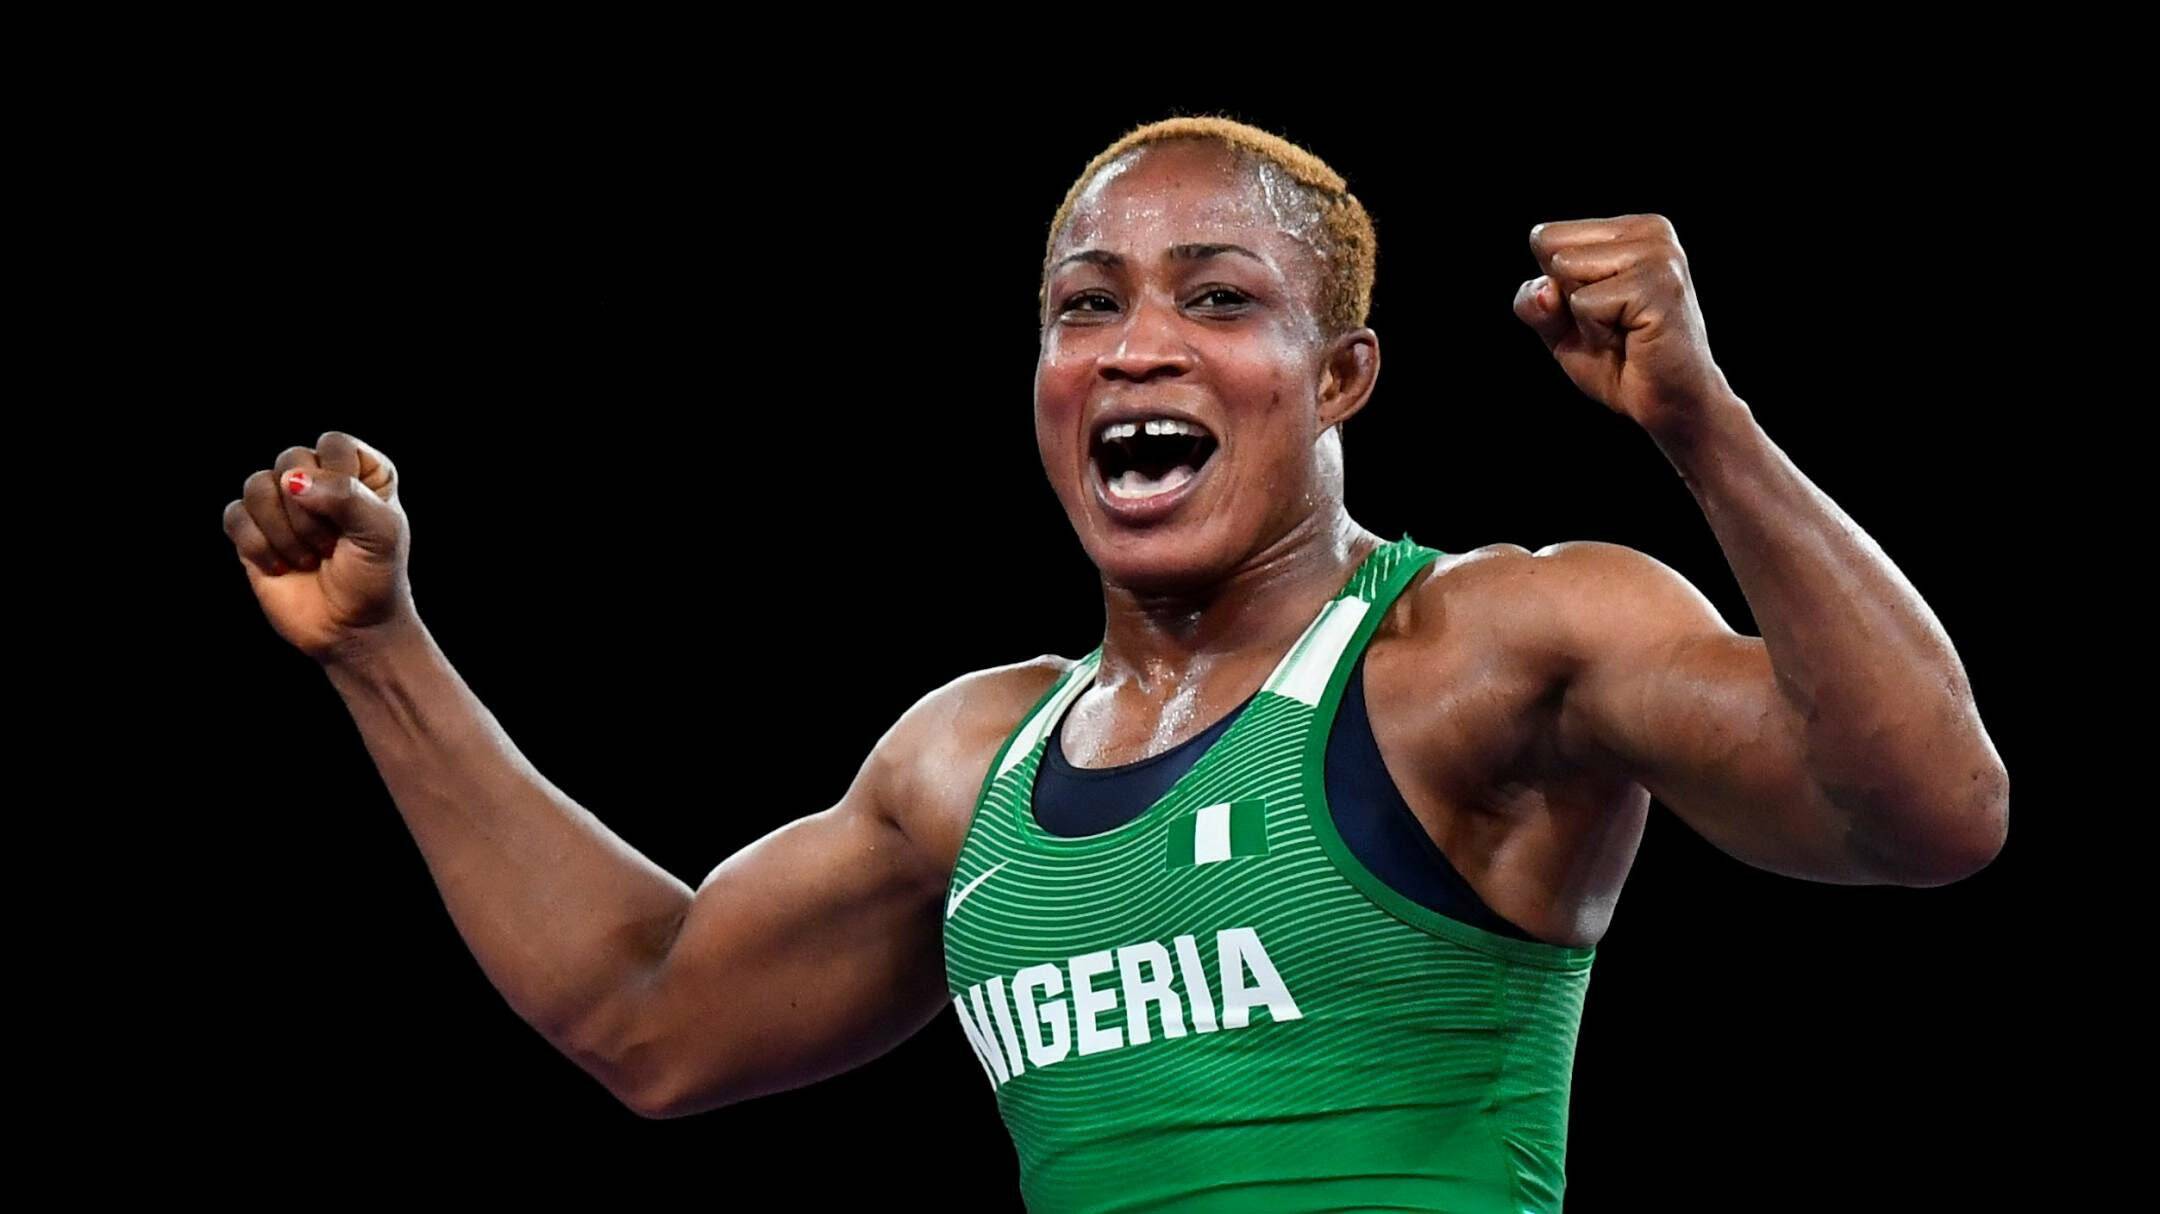 Blessing Okagbare handed 10-year ban for doping